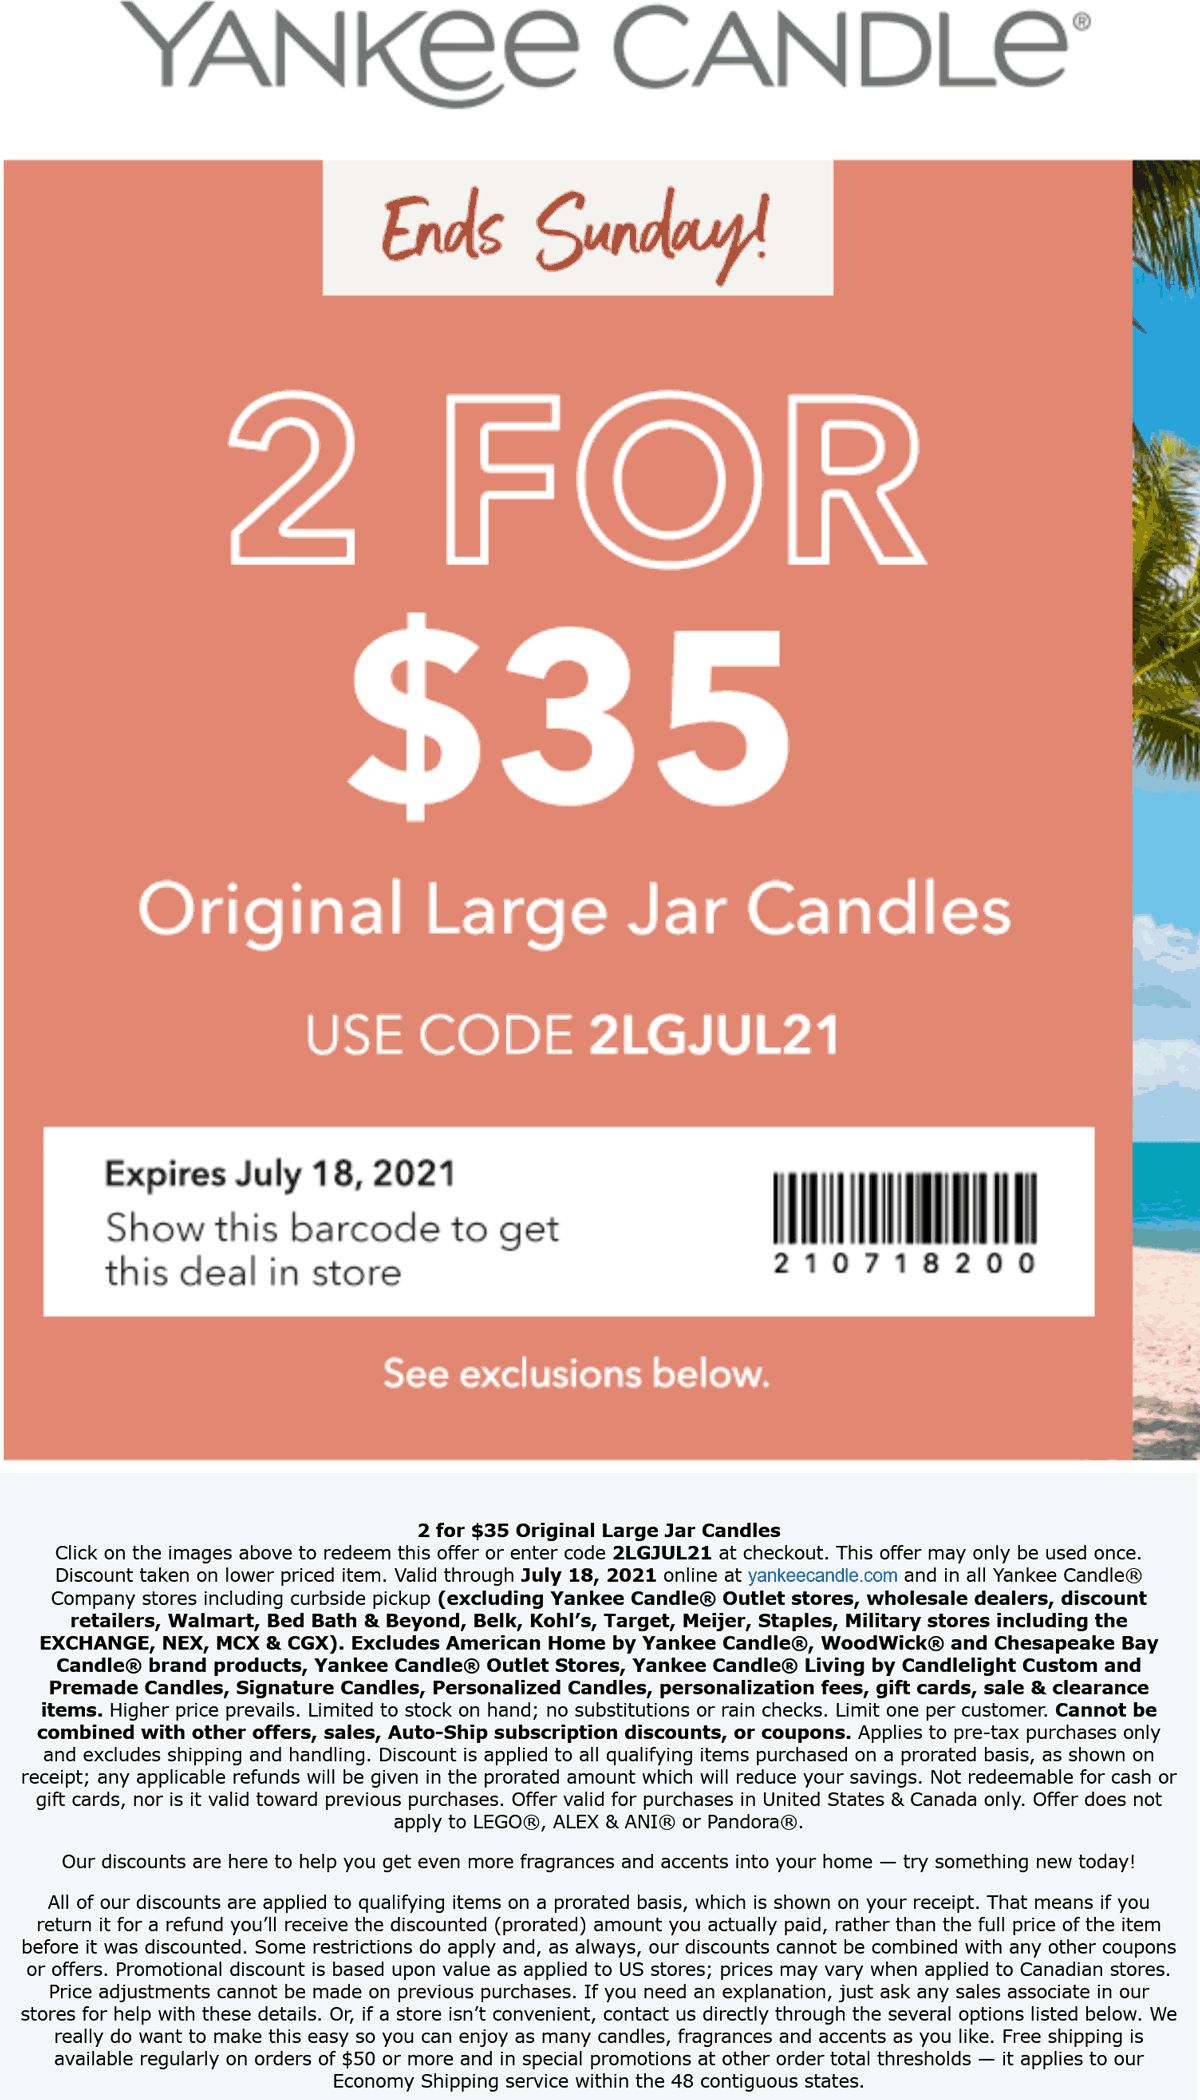 Yankee Candle stores Coupon  2 large candles for $35 at Yankee Candle, or online via promo code 2LGJUL21 #yankeecandle 